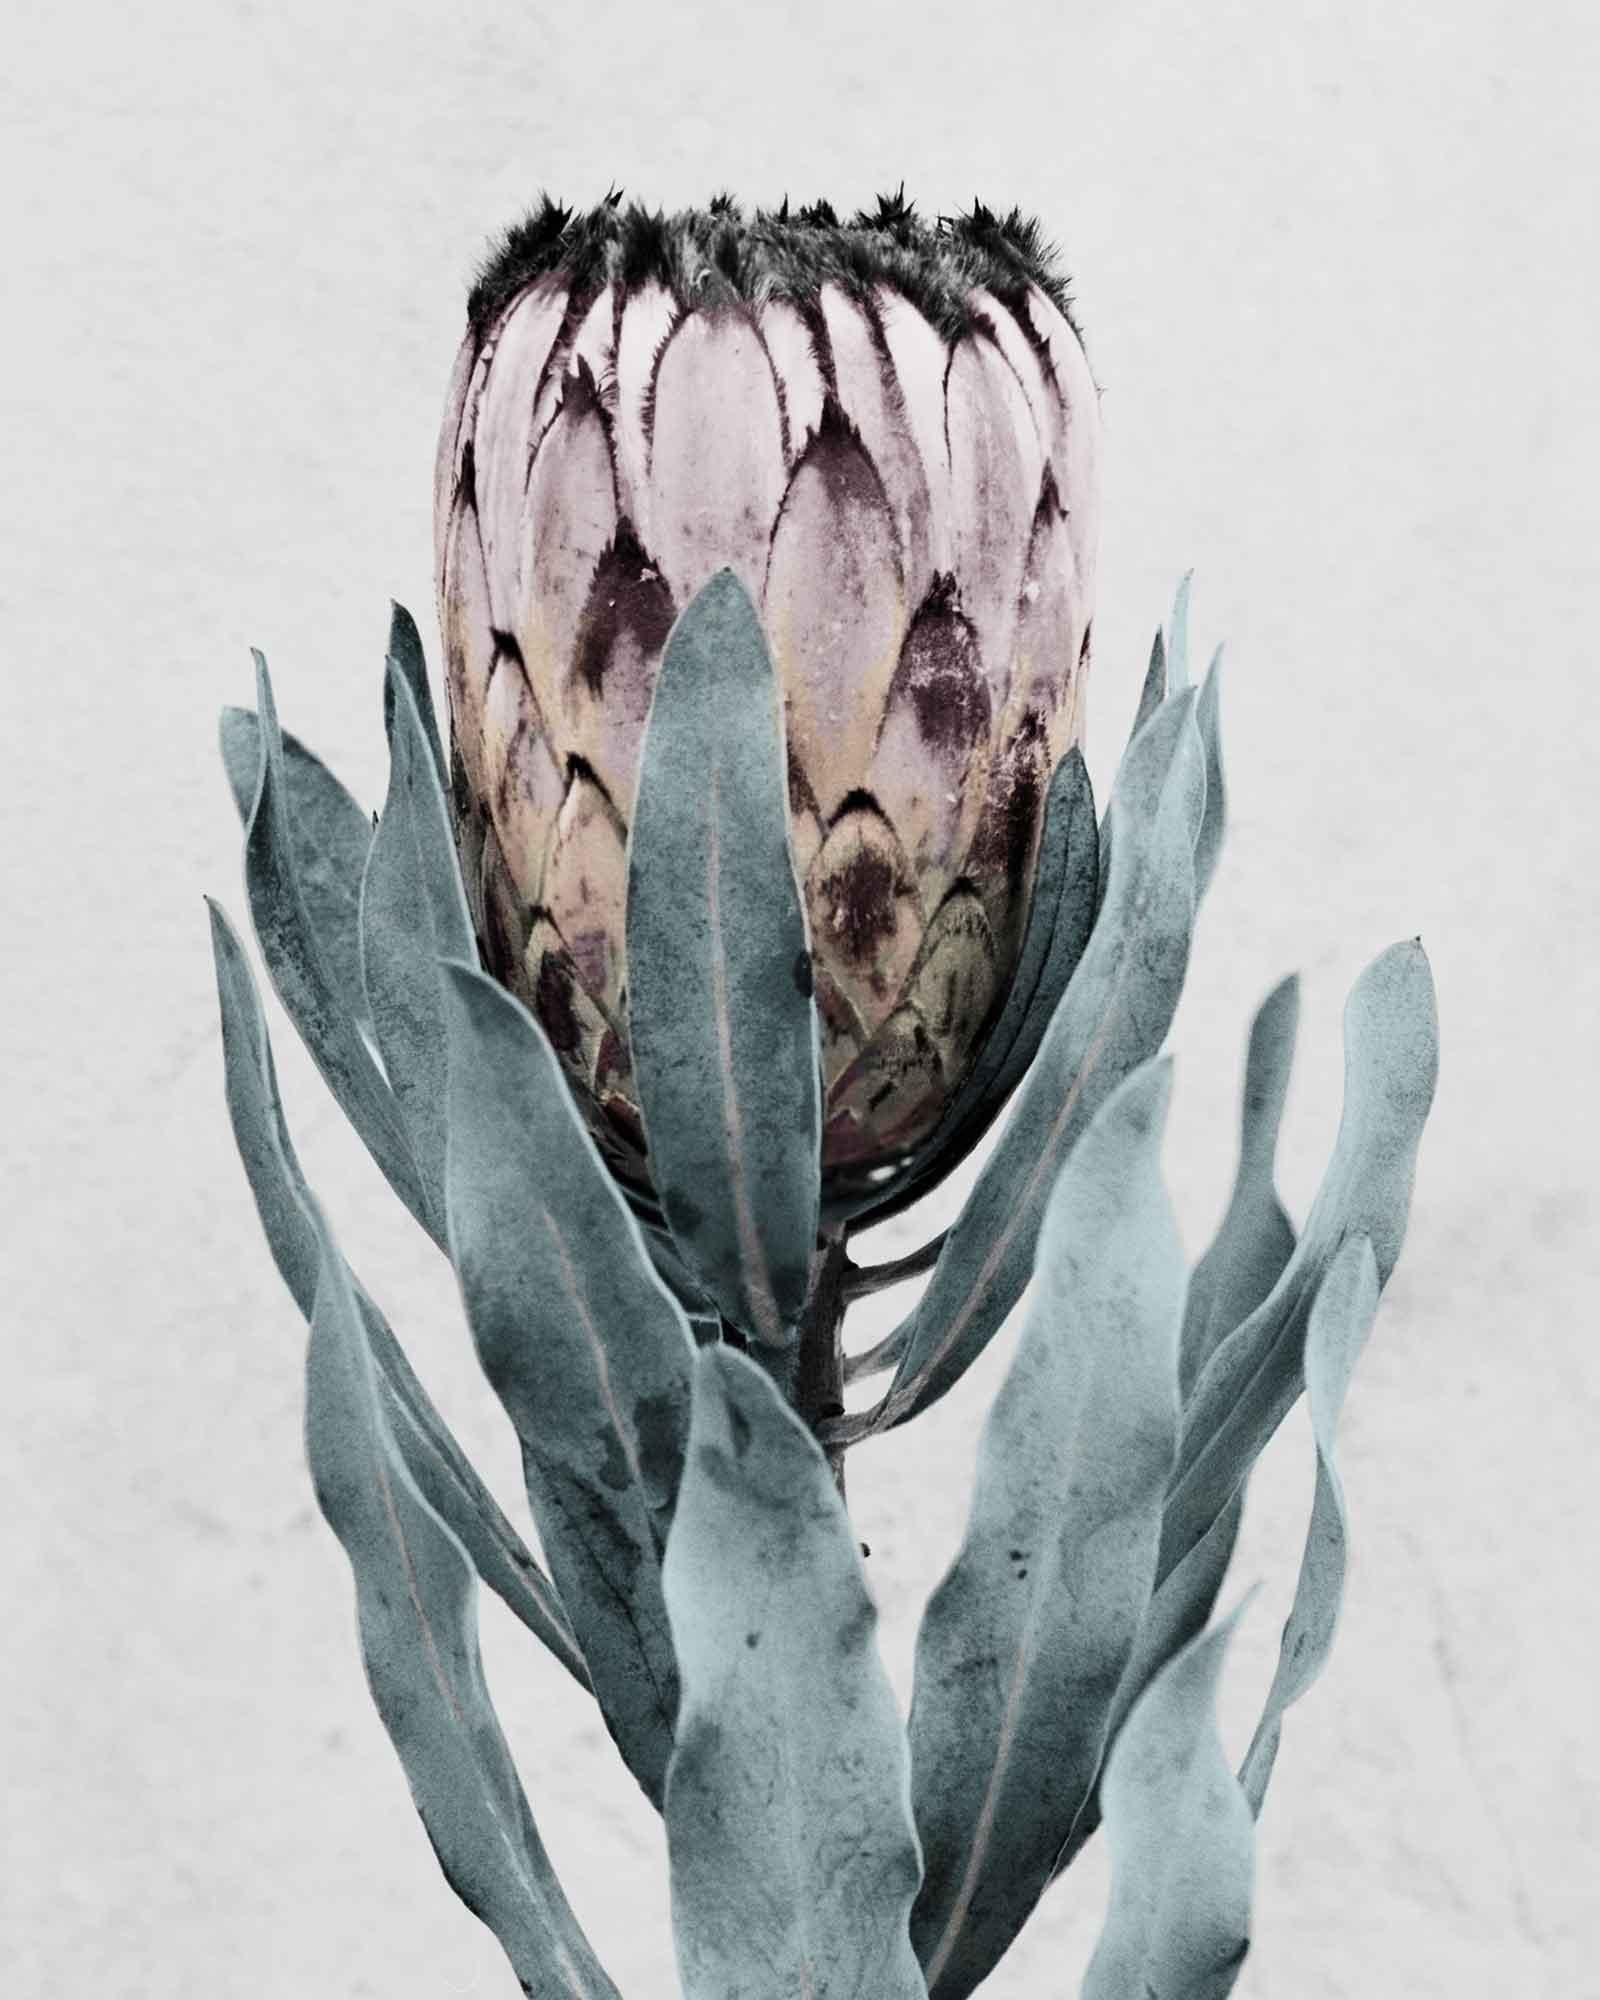 Botanica #17 (Protea Cynaroides) - Photograph by Vee Speers